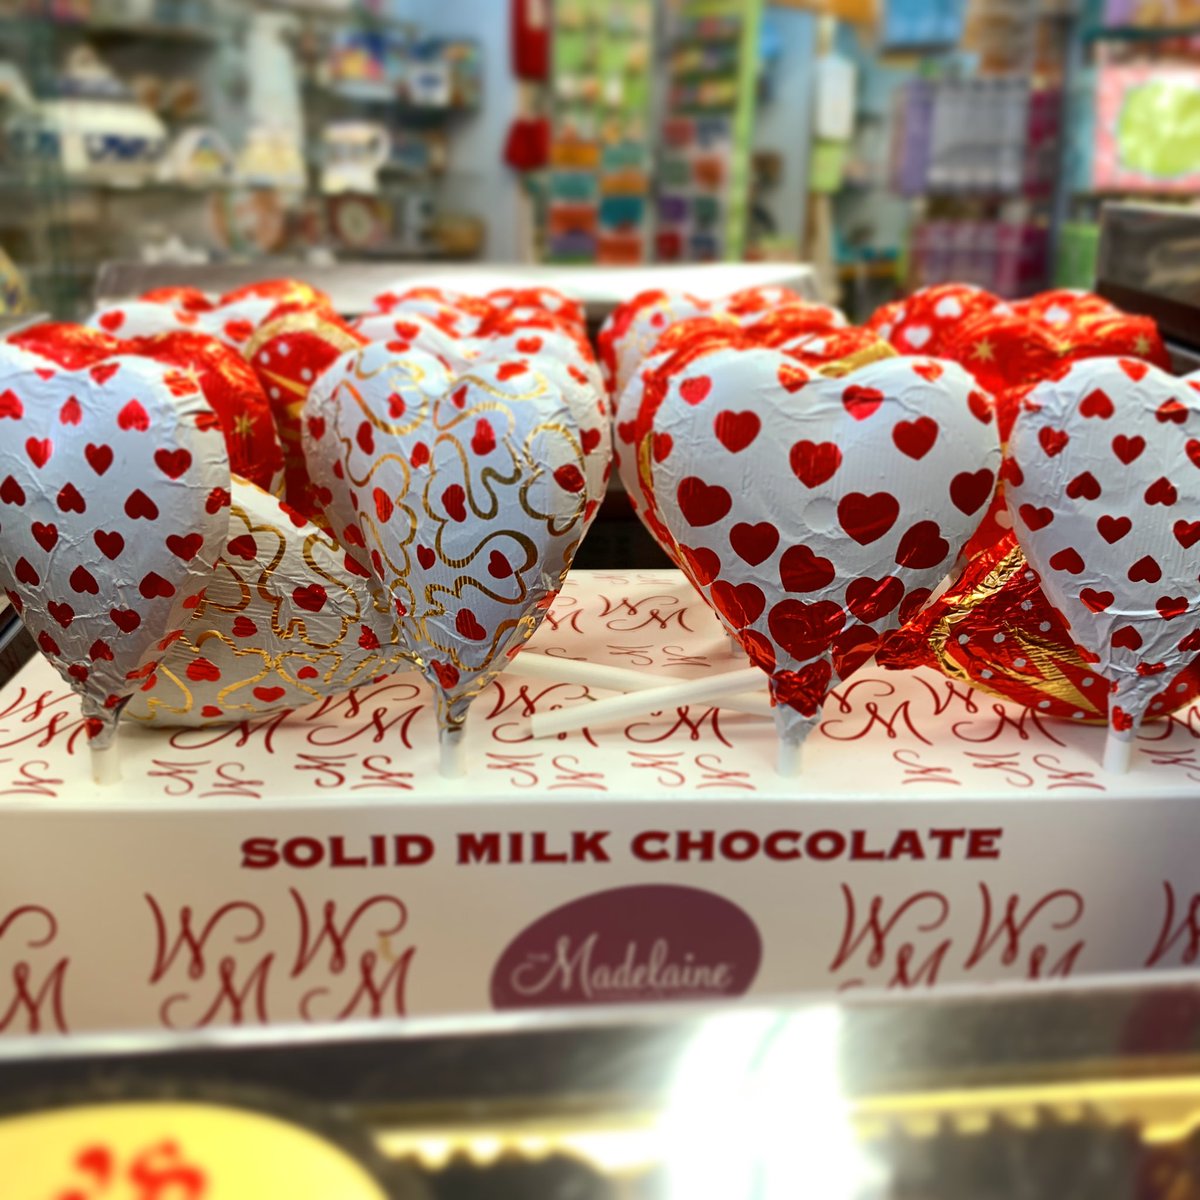 BRUMMER’S CHOCOLATES IS BACK OPEN AND HERE FOR ALL OF YOUR CHOCOLATE NEEDS 🍫🤤🍫 Stop by today!! #valentines #chocolate #backopen #valentineschocolate #candy #candystore #chocolatehearts